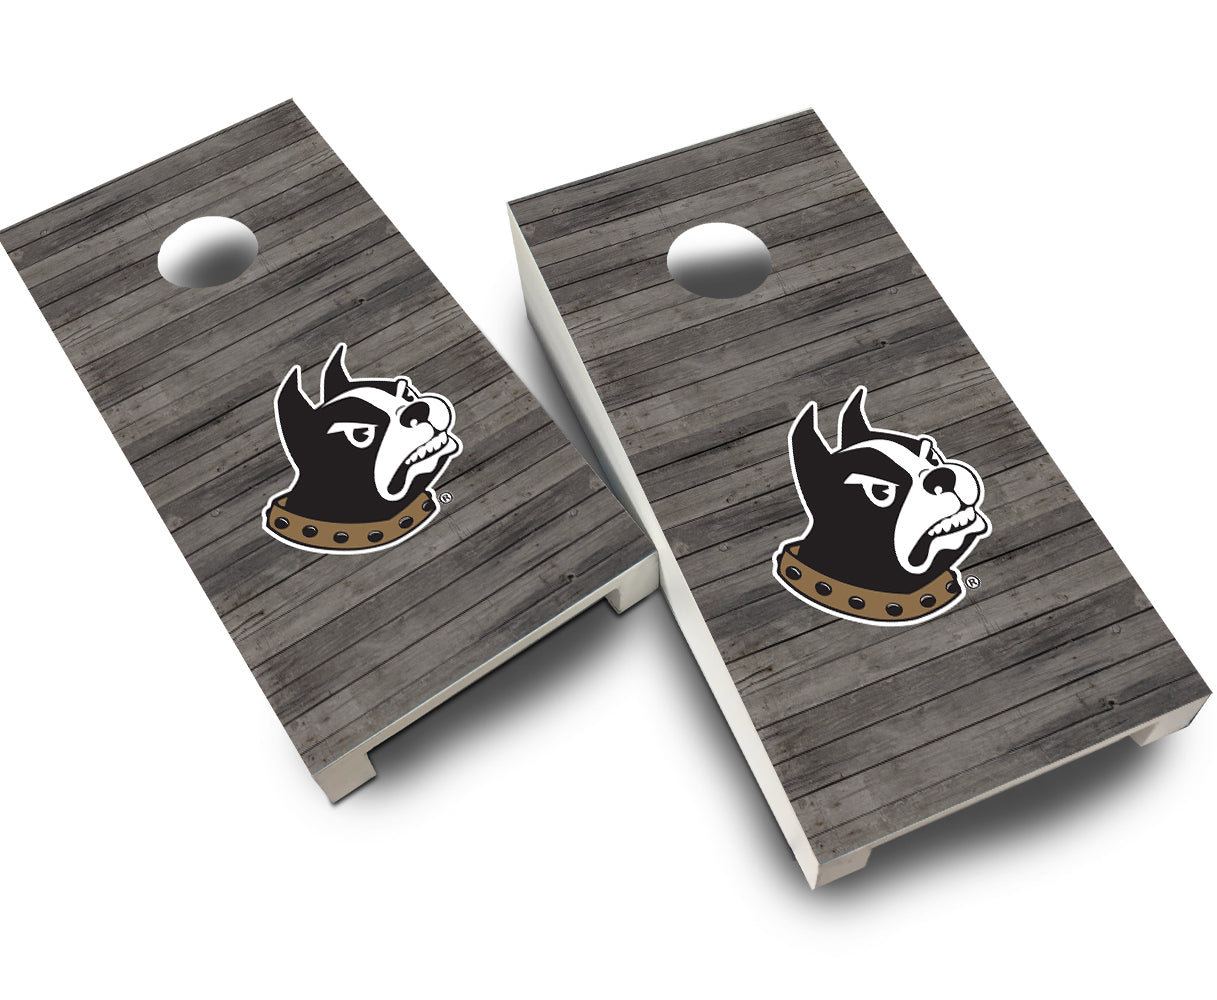 "Wofford Distressed" Tabletop Cornhole Boards